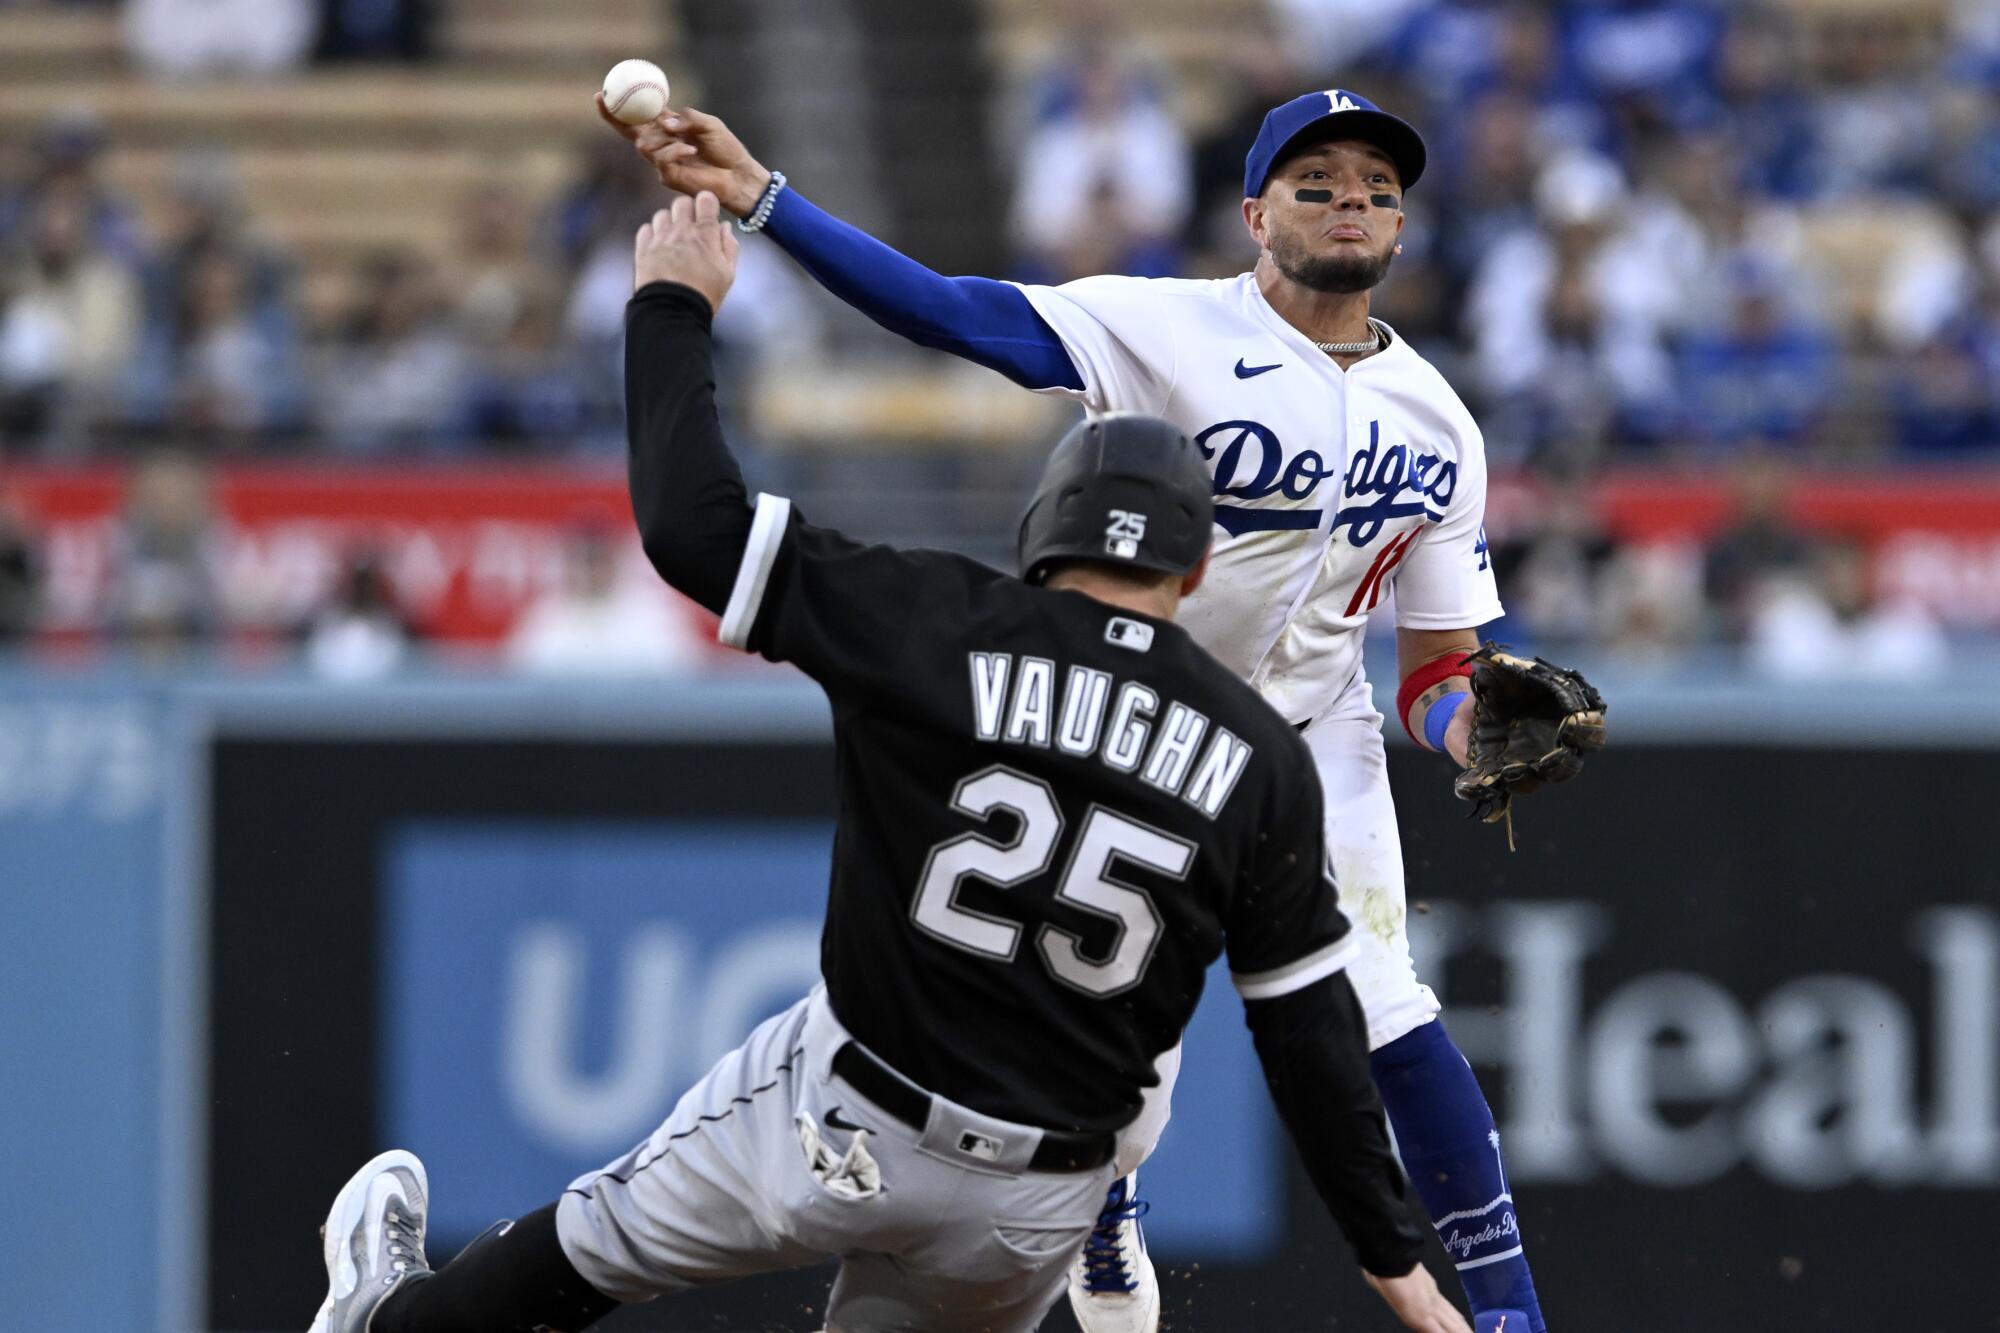 Dodgers bullpen blows it late against White Sox - Los Angeles Times